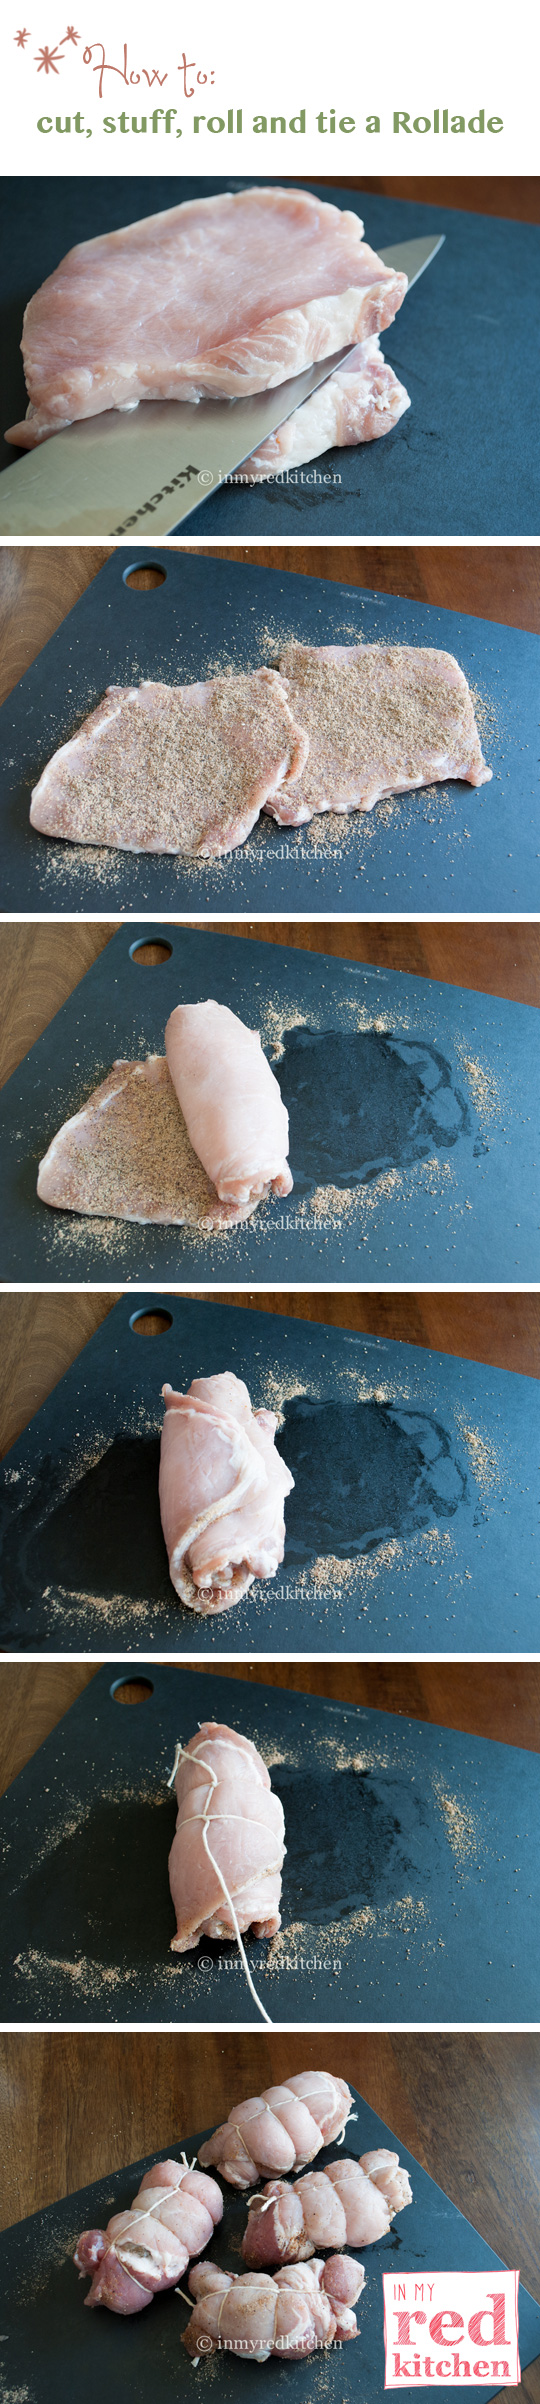 How-to-Rollade